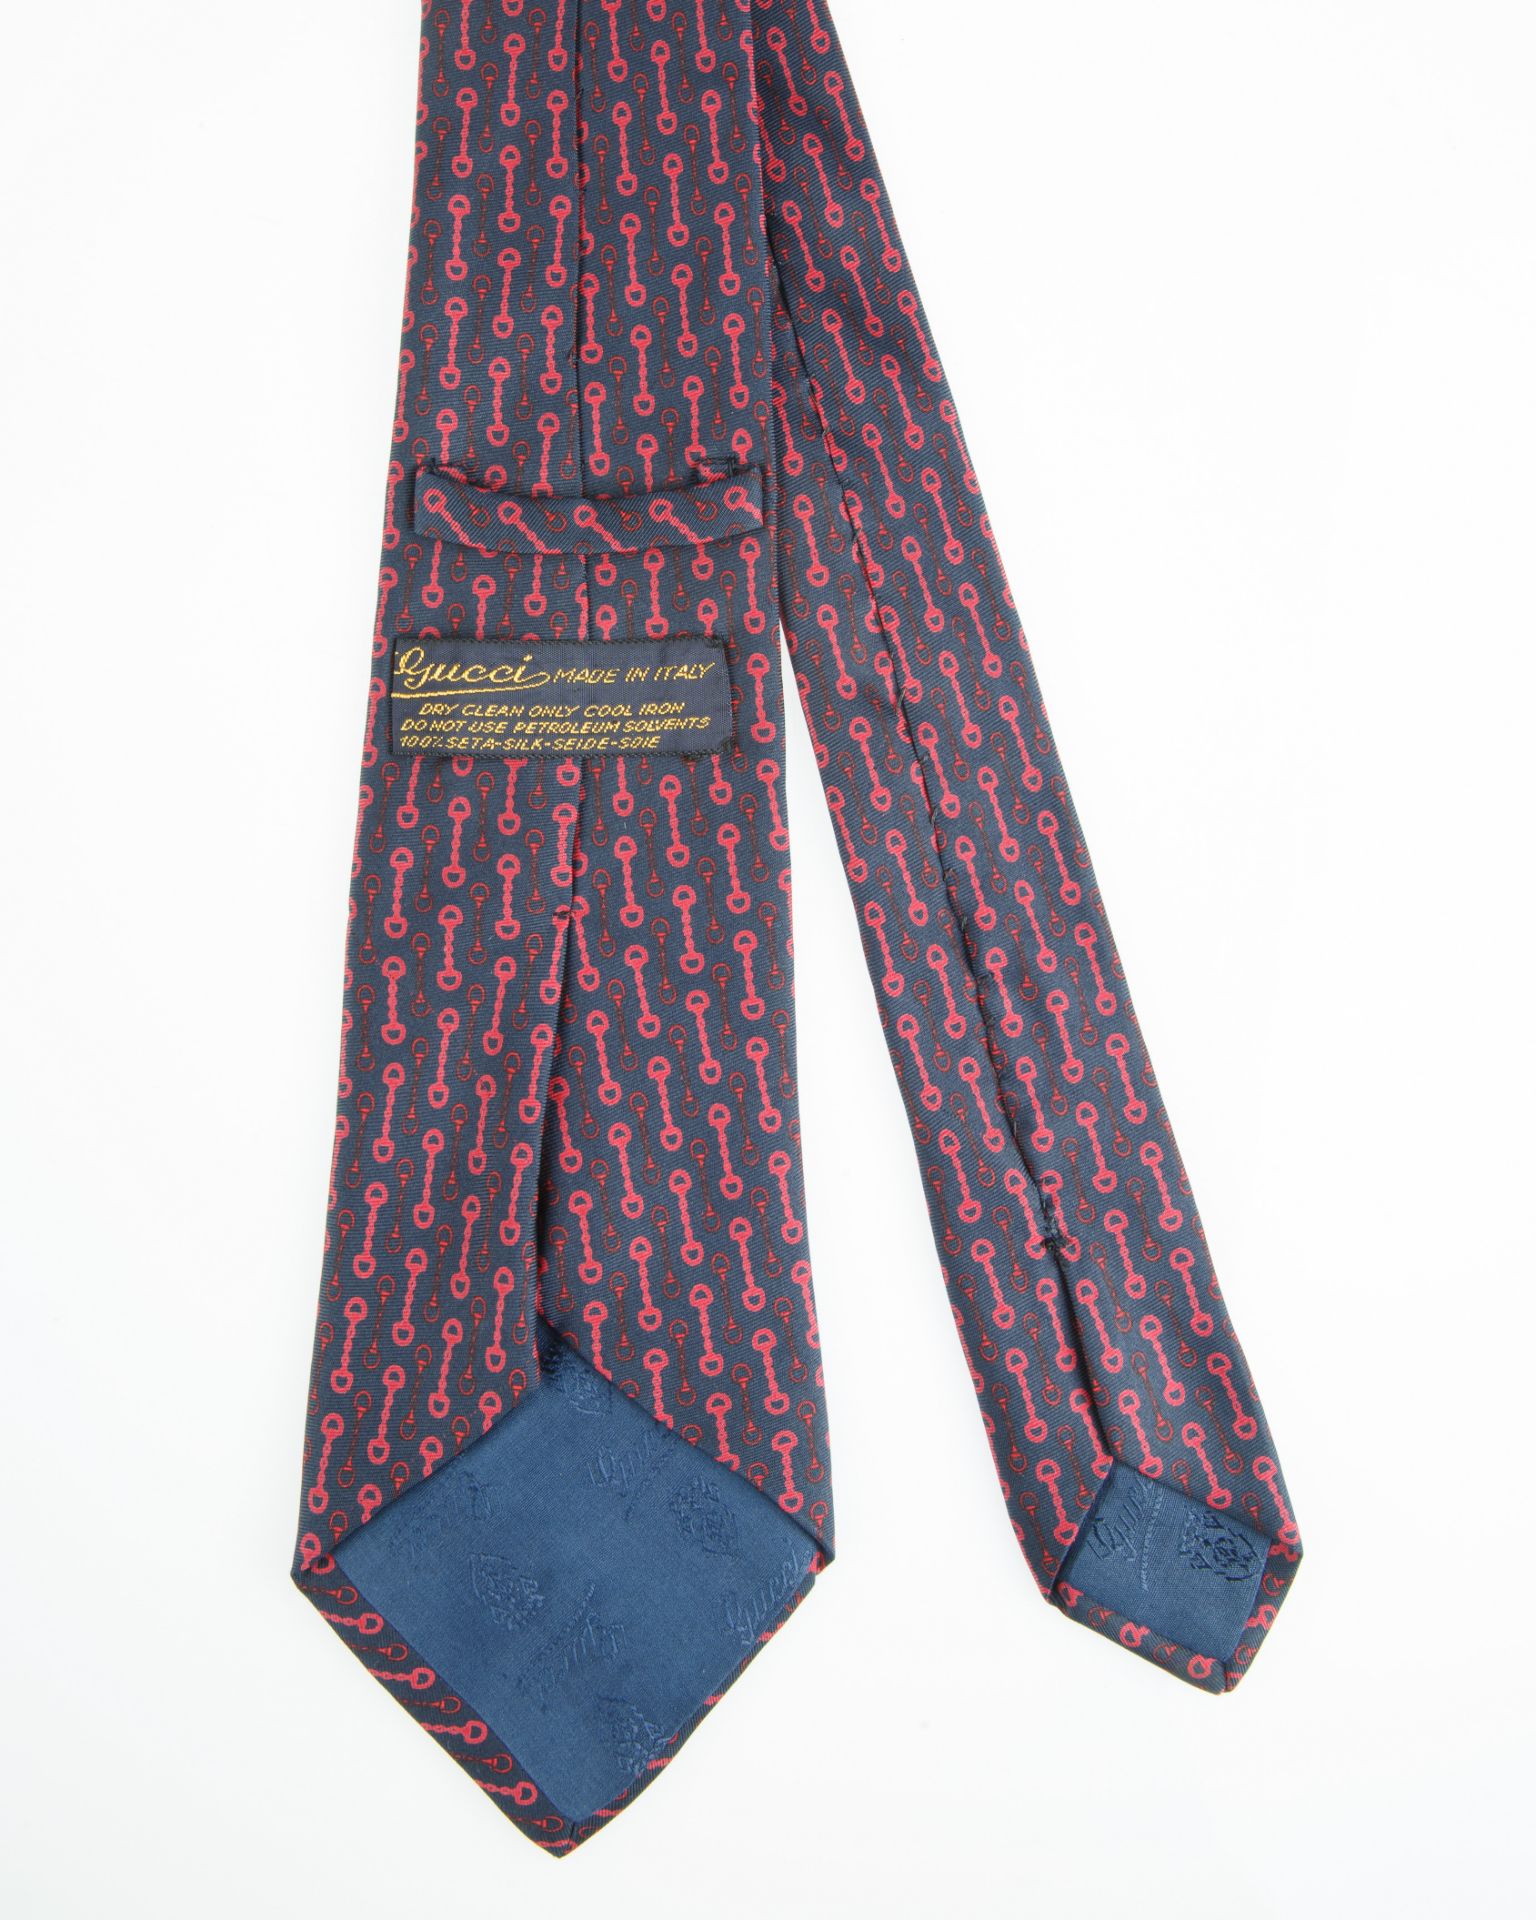 GROUP OF SEVEN GUCCI TIES - Image 11 of 15